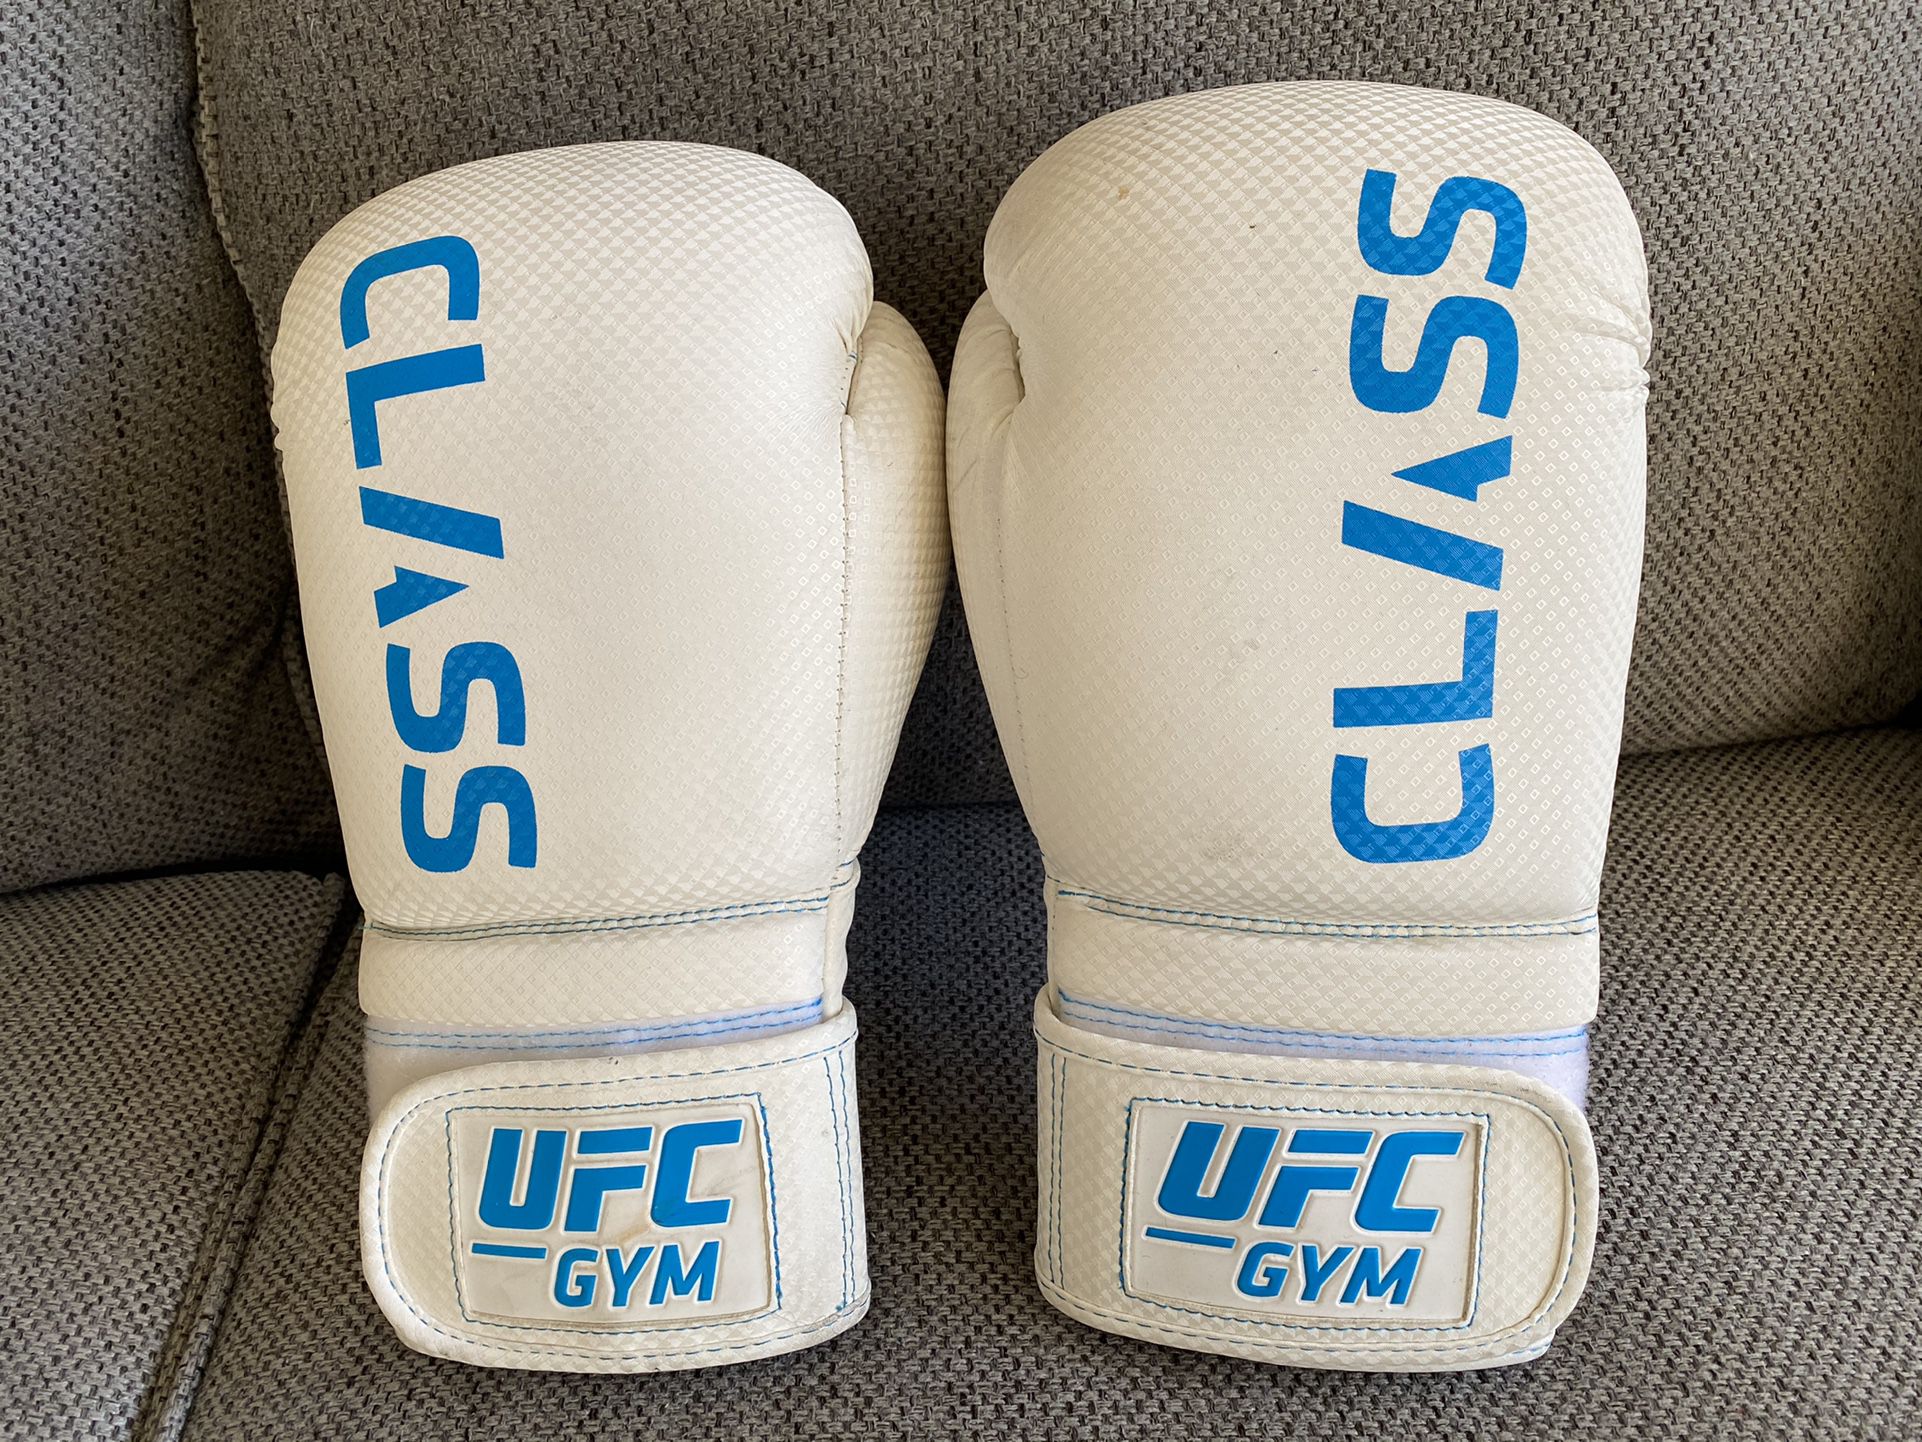 UFC Gyn Boxing Gloves